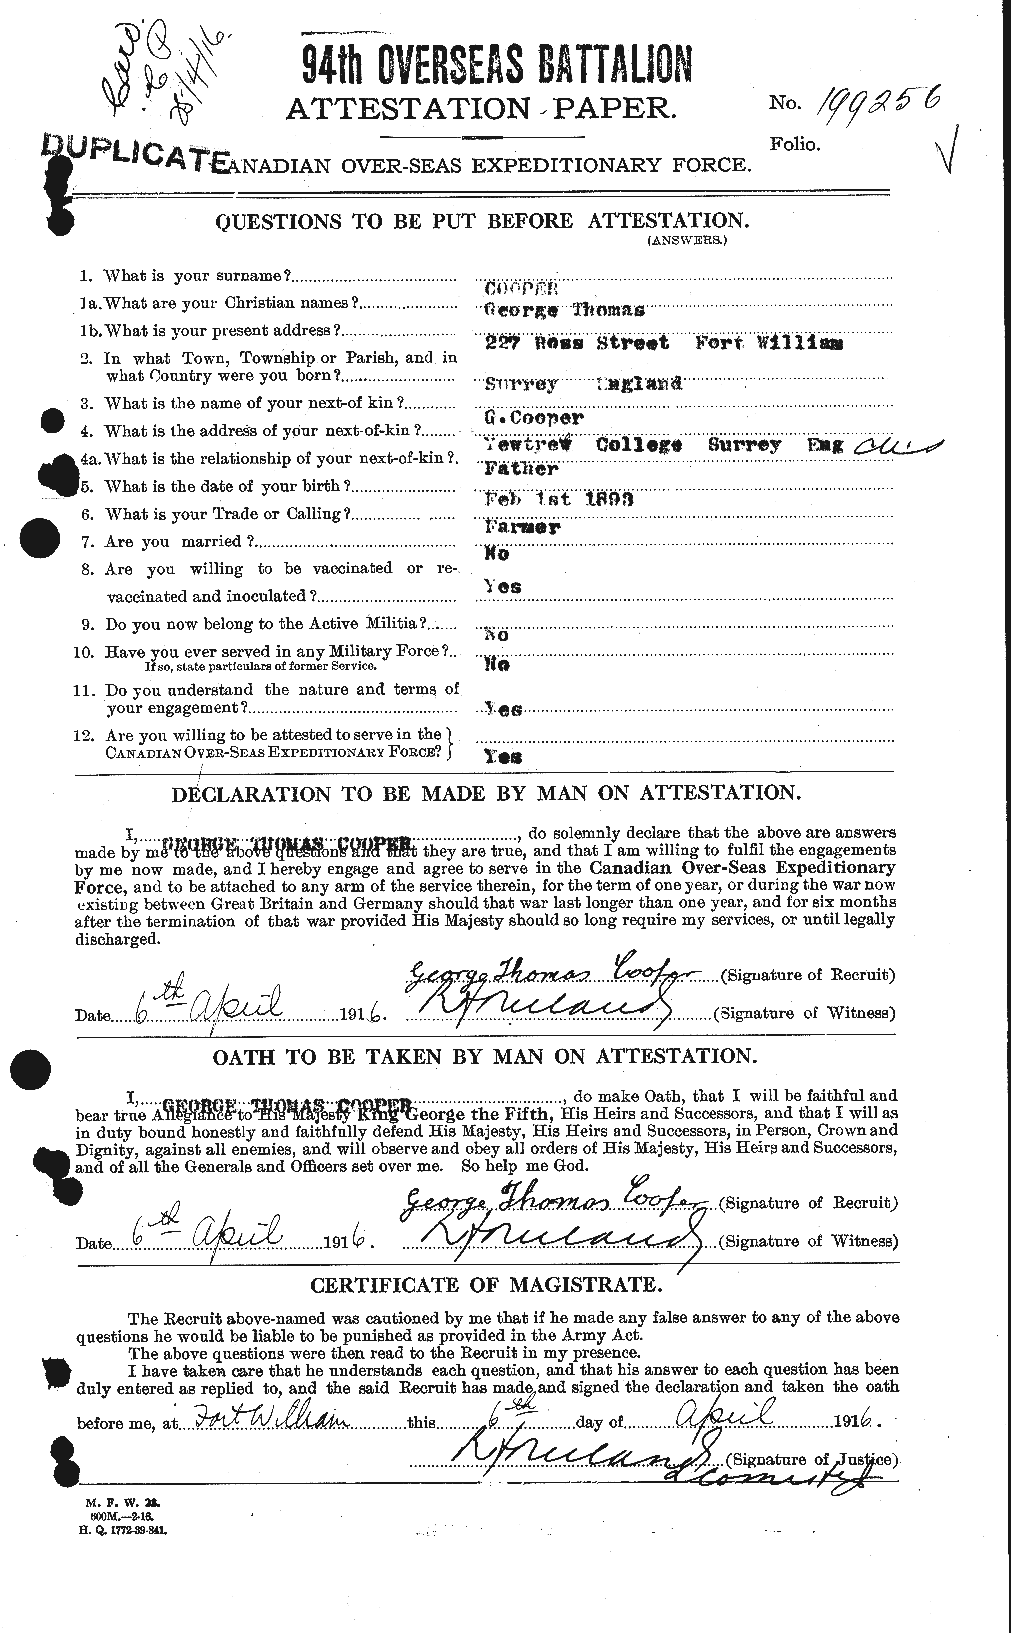 Personnel Records of the First World War - CEF 057540a